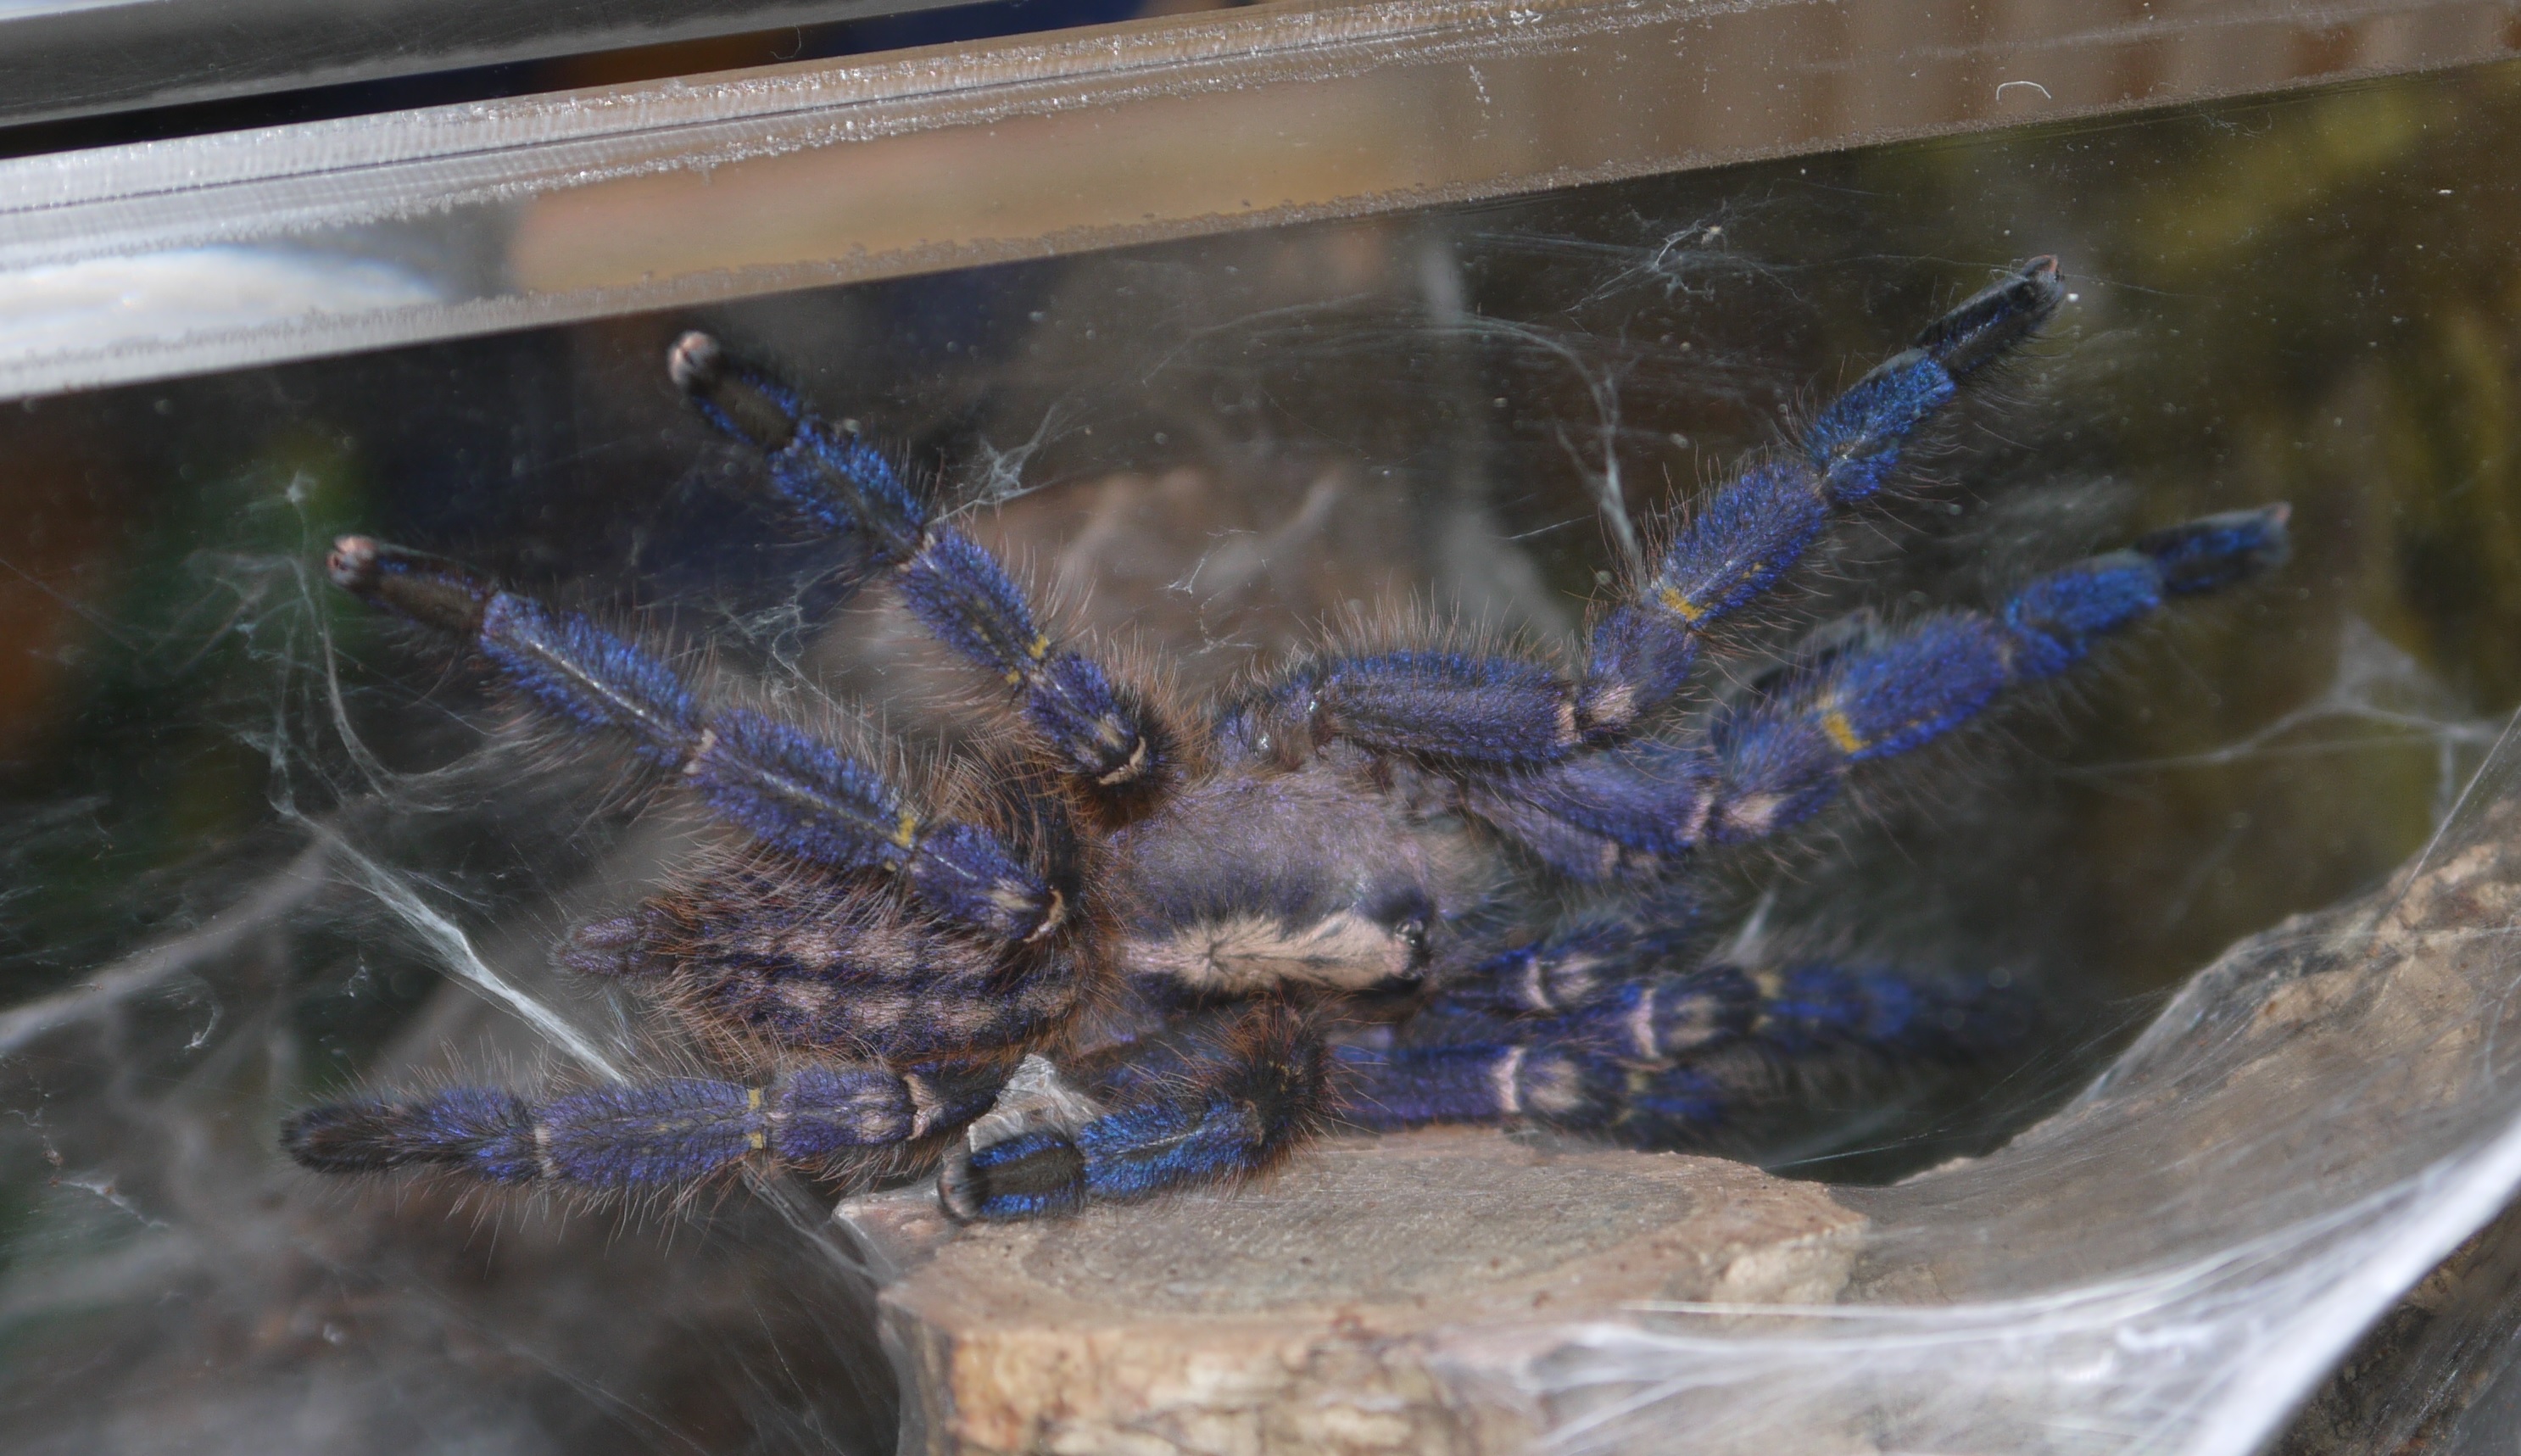 P. metallica freshly moulted pic 2